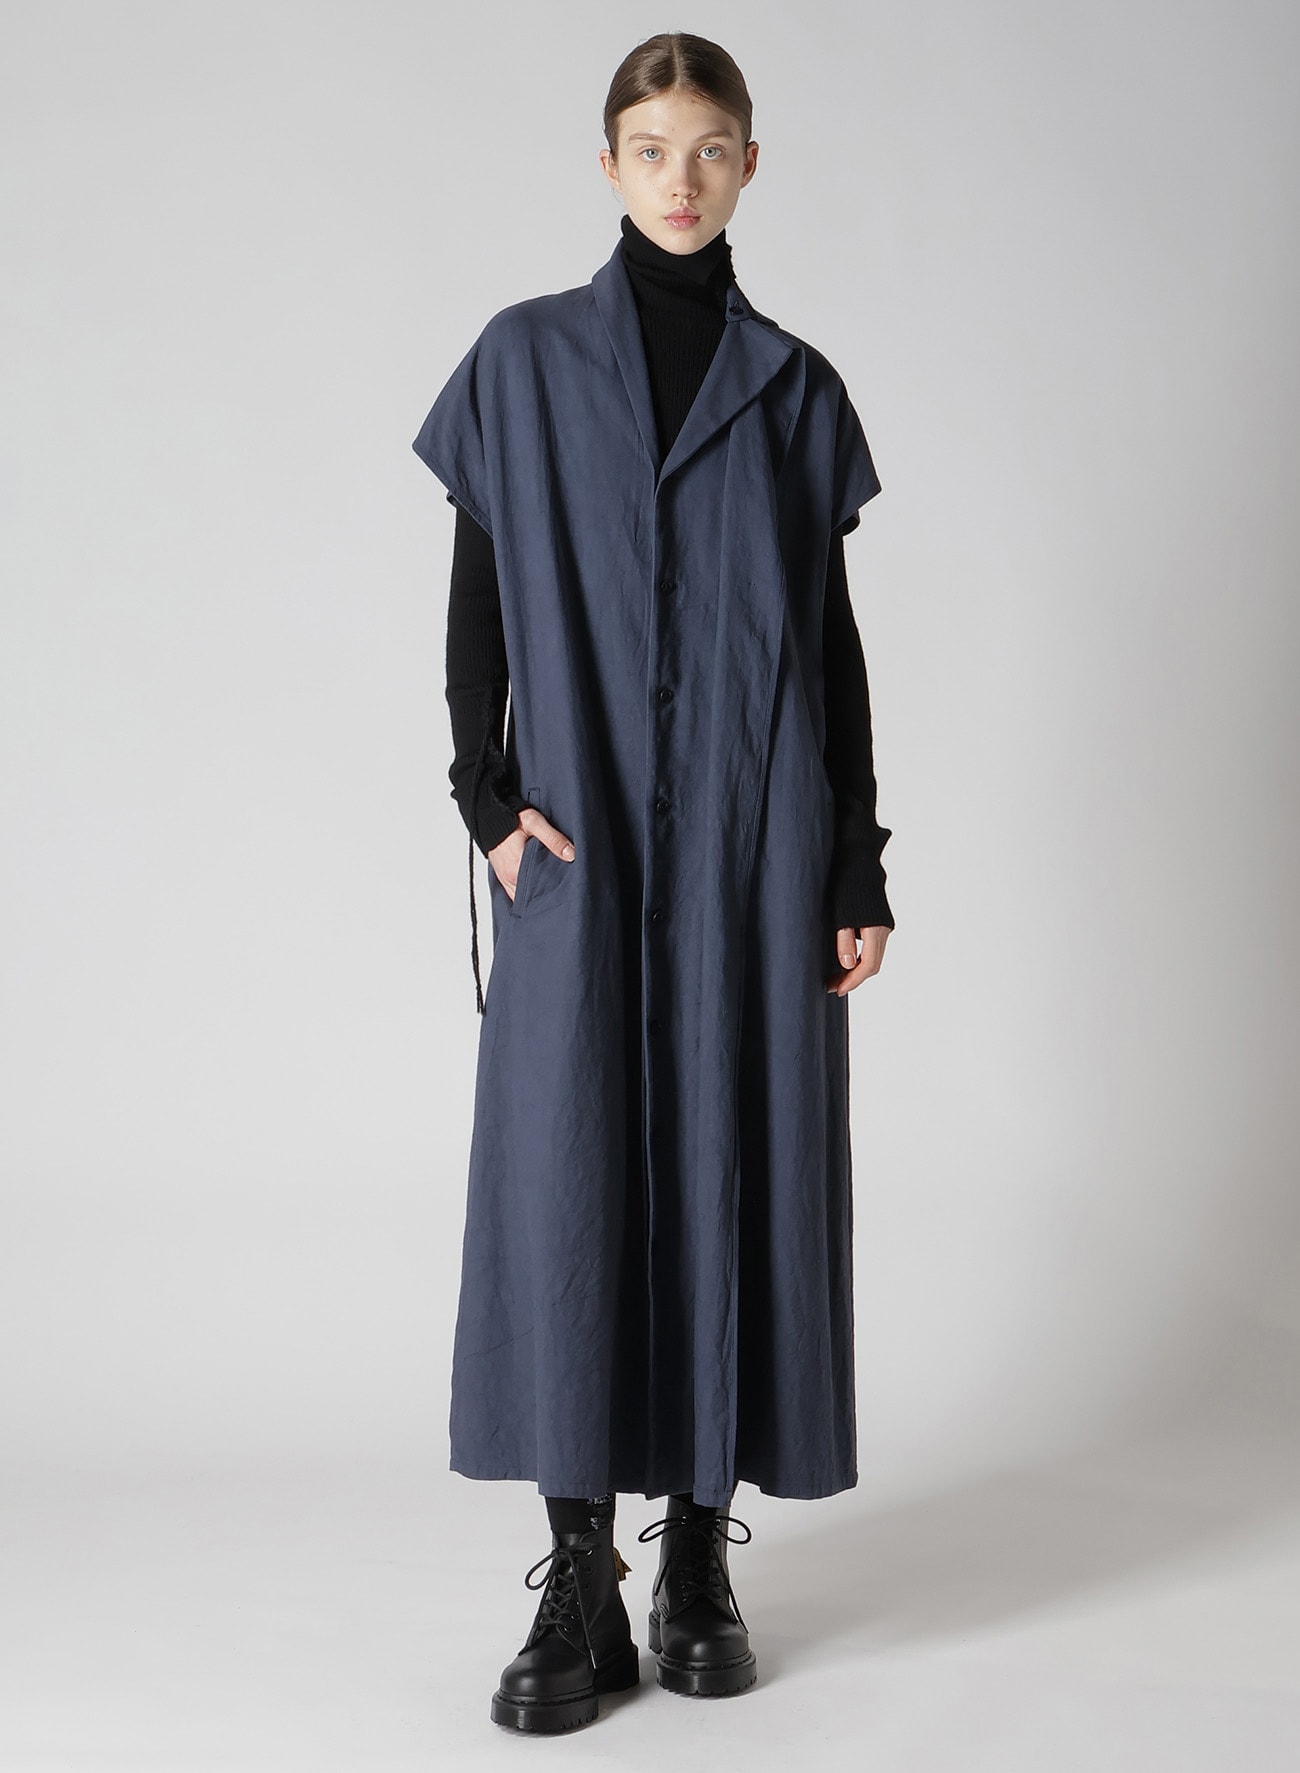 【8/2 12:00(JST) Release】TWILL GARMENT WASH FRENCH SLEEVE DRESS